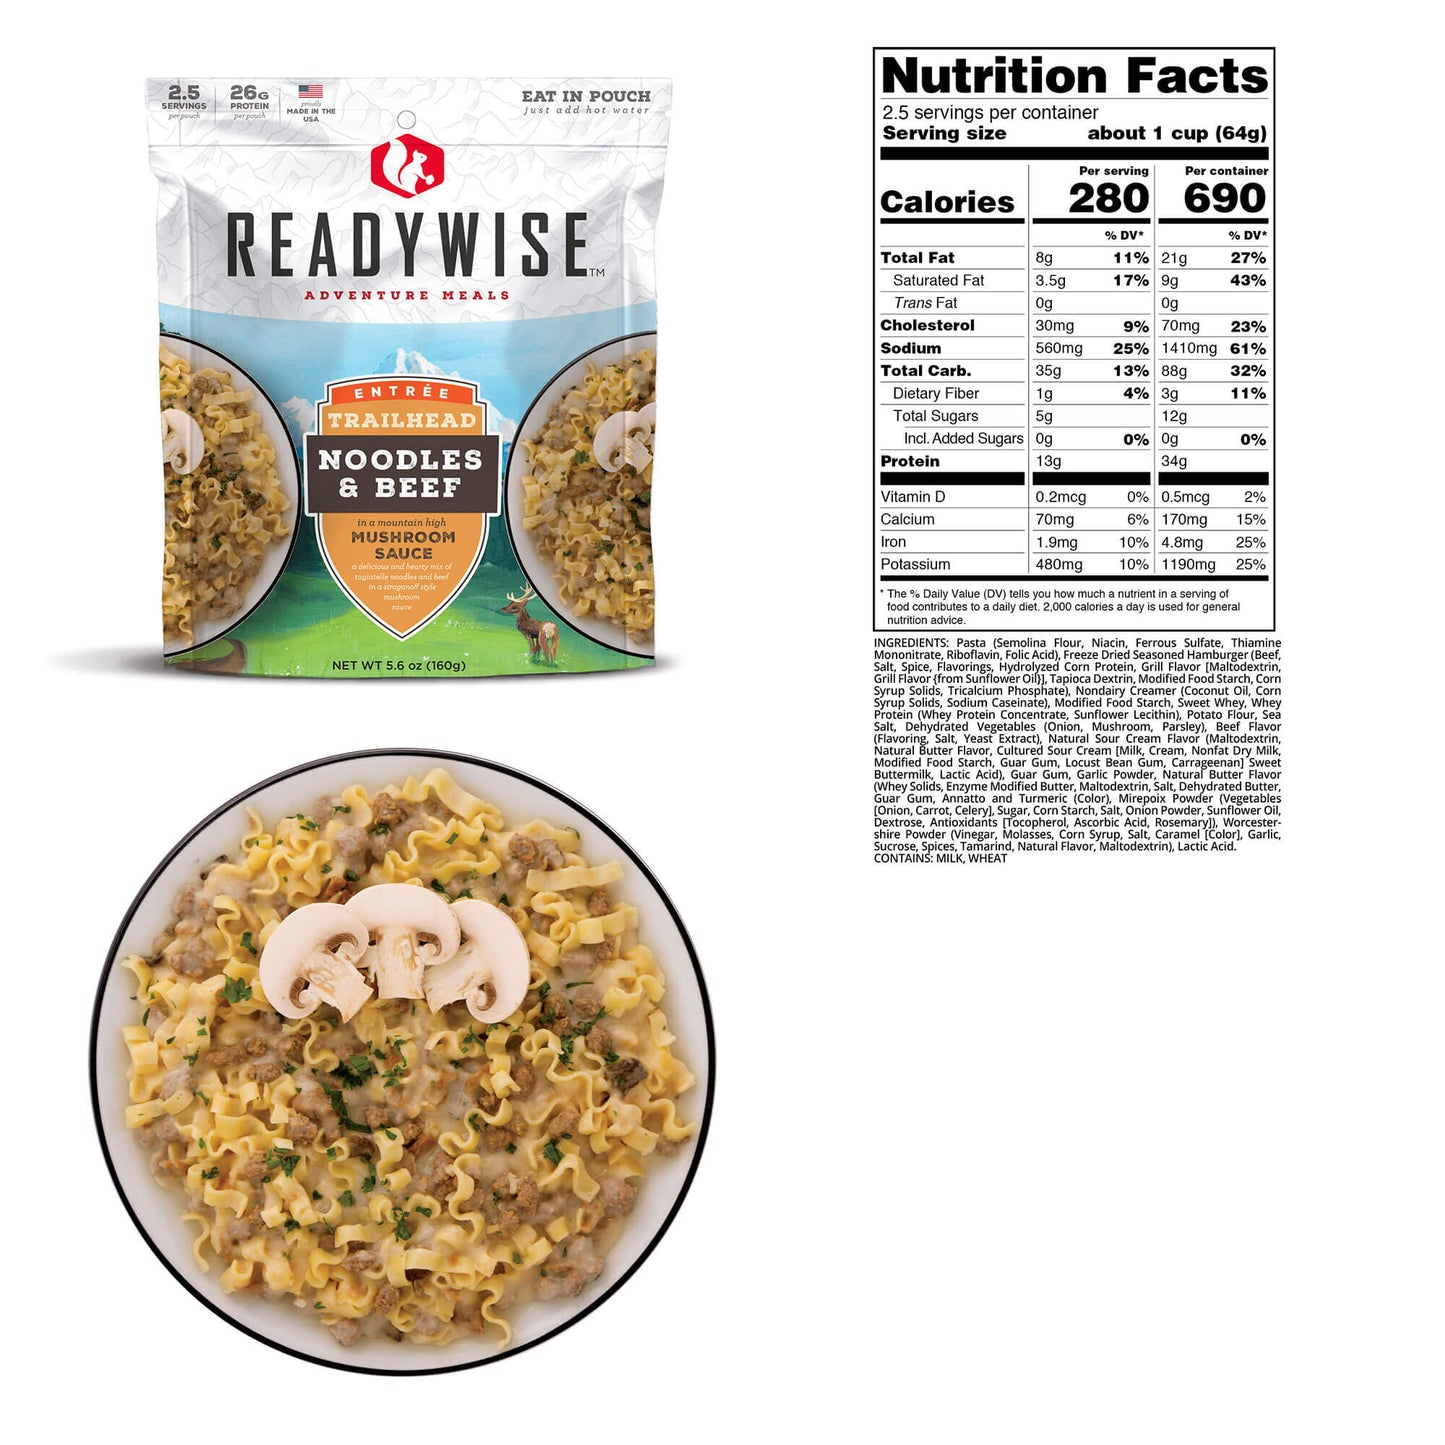 readywise adventure meals 2 day adventure bag noodles and beef nutritional information 